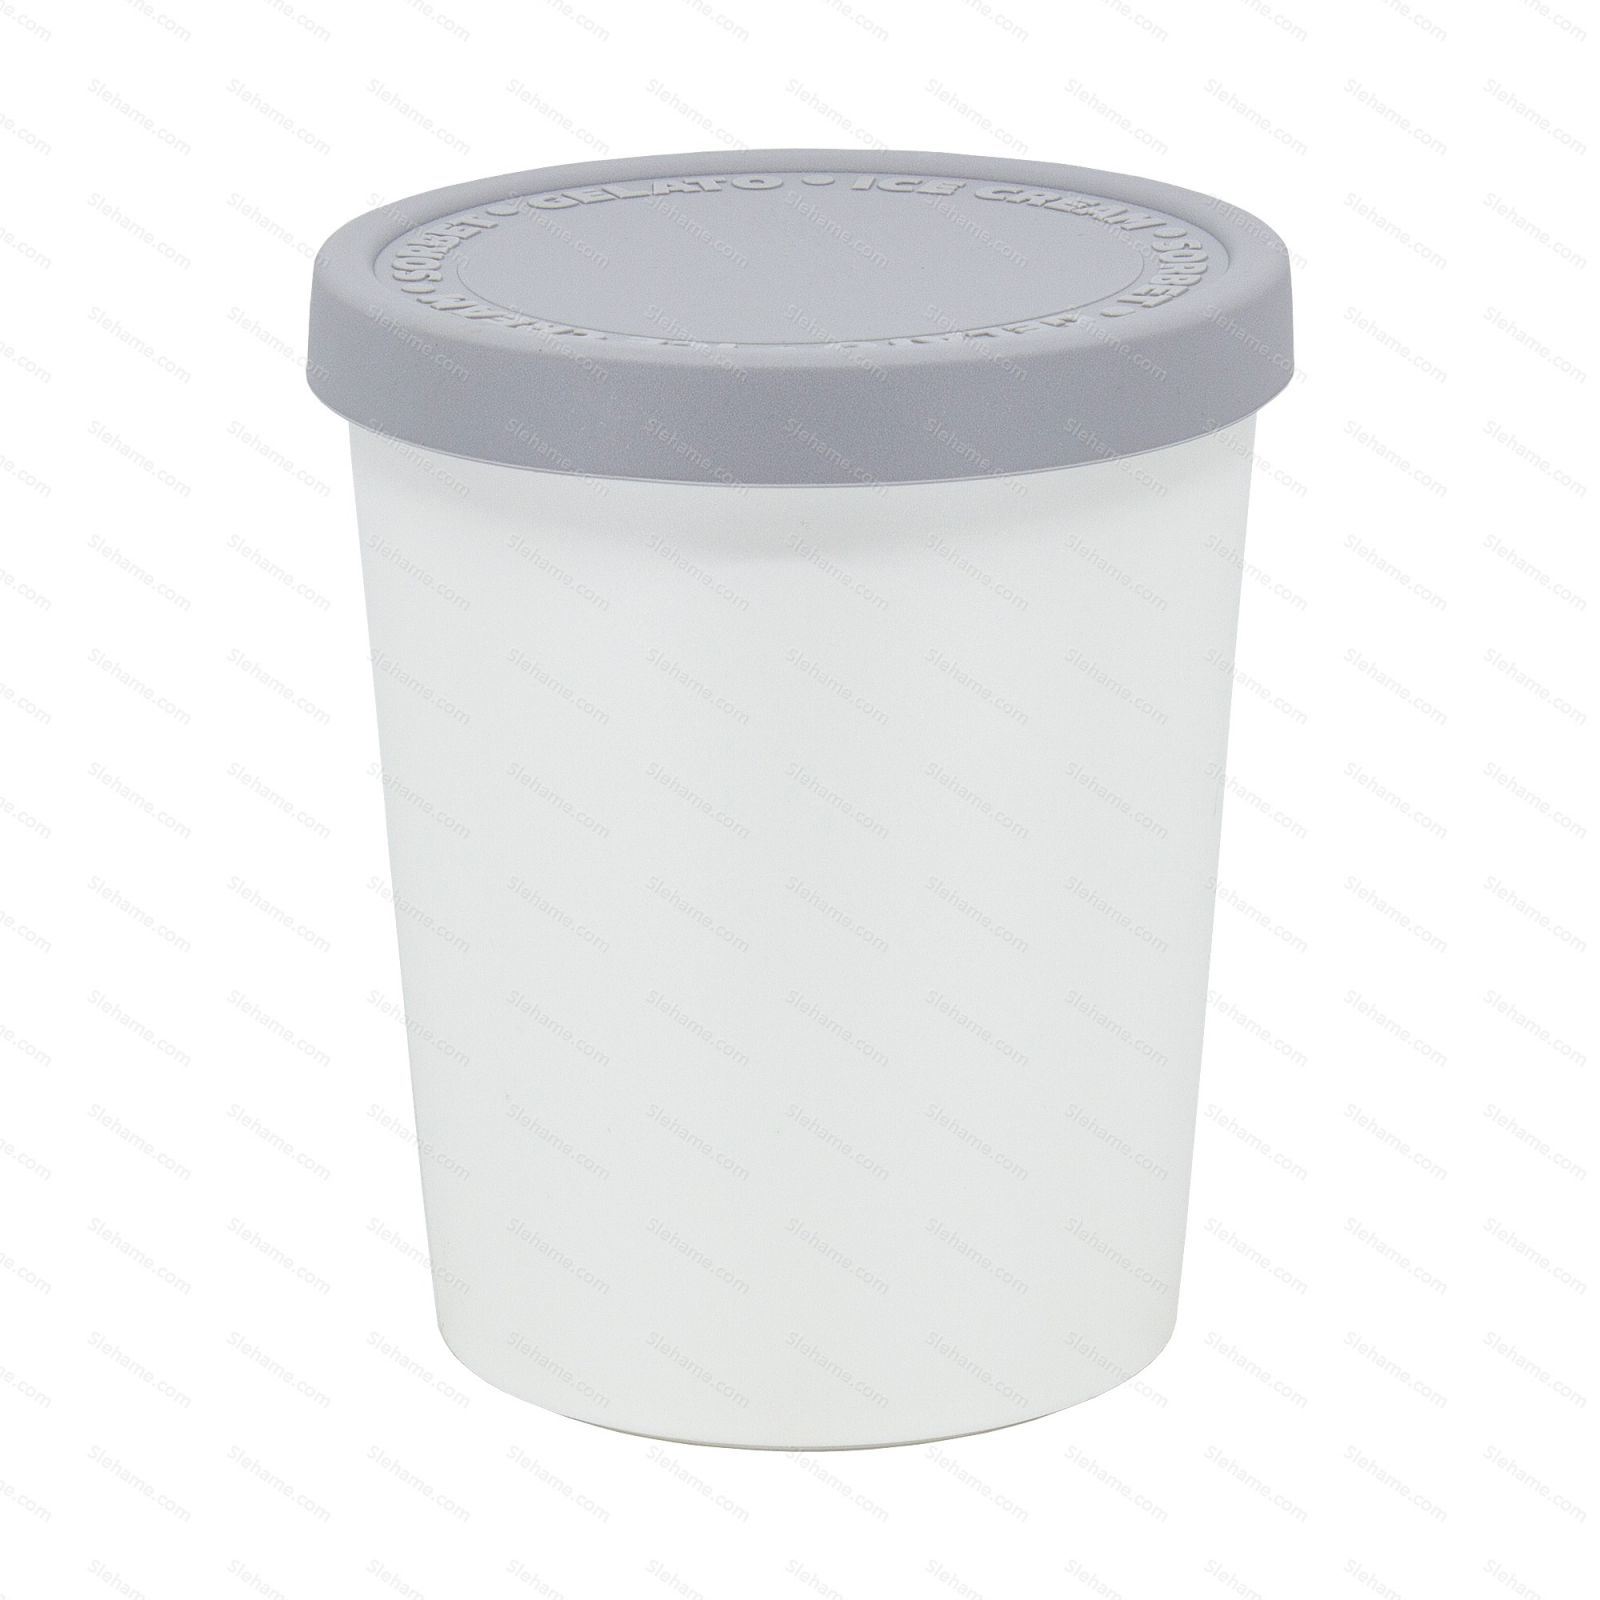 Ice cream tub Tovolo SWEET TREAT 1.0 l, oyster gray - clear front side